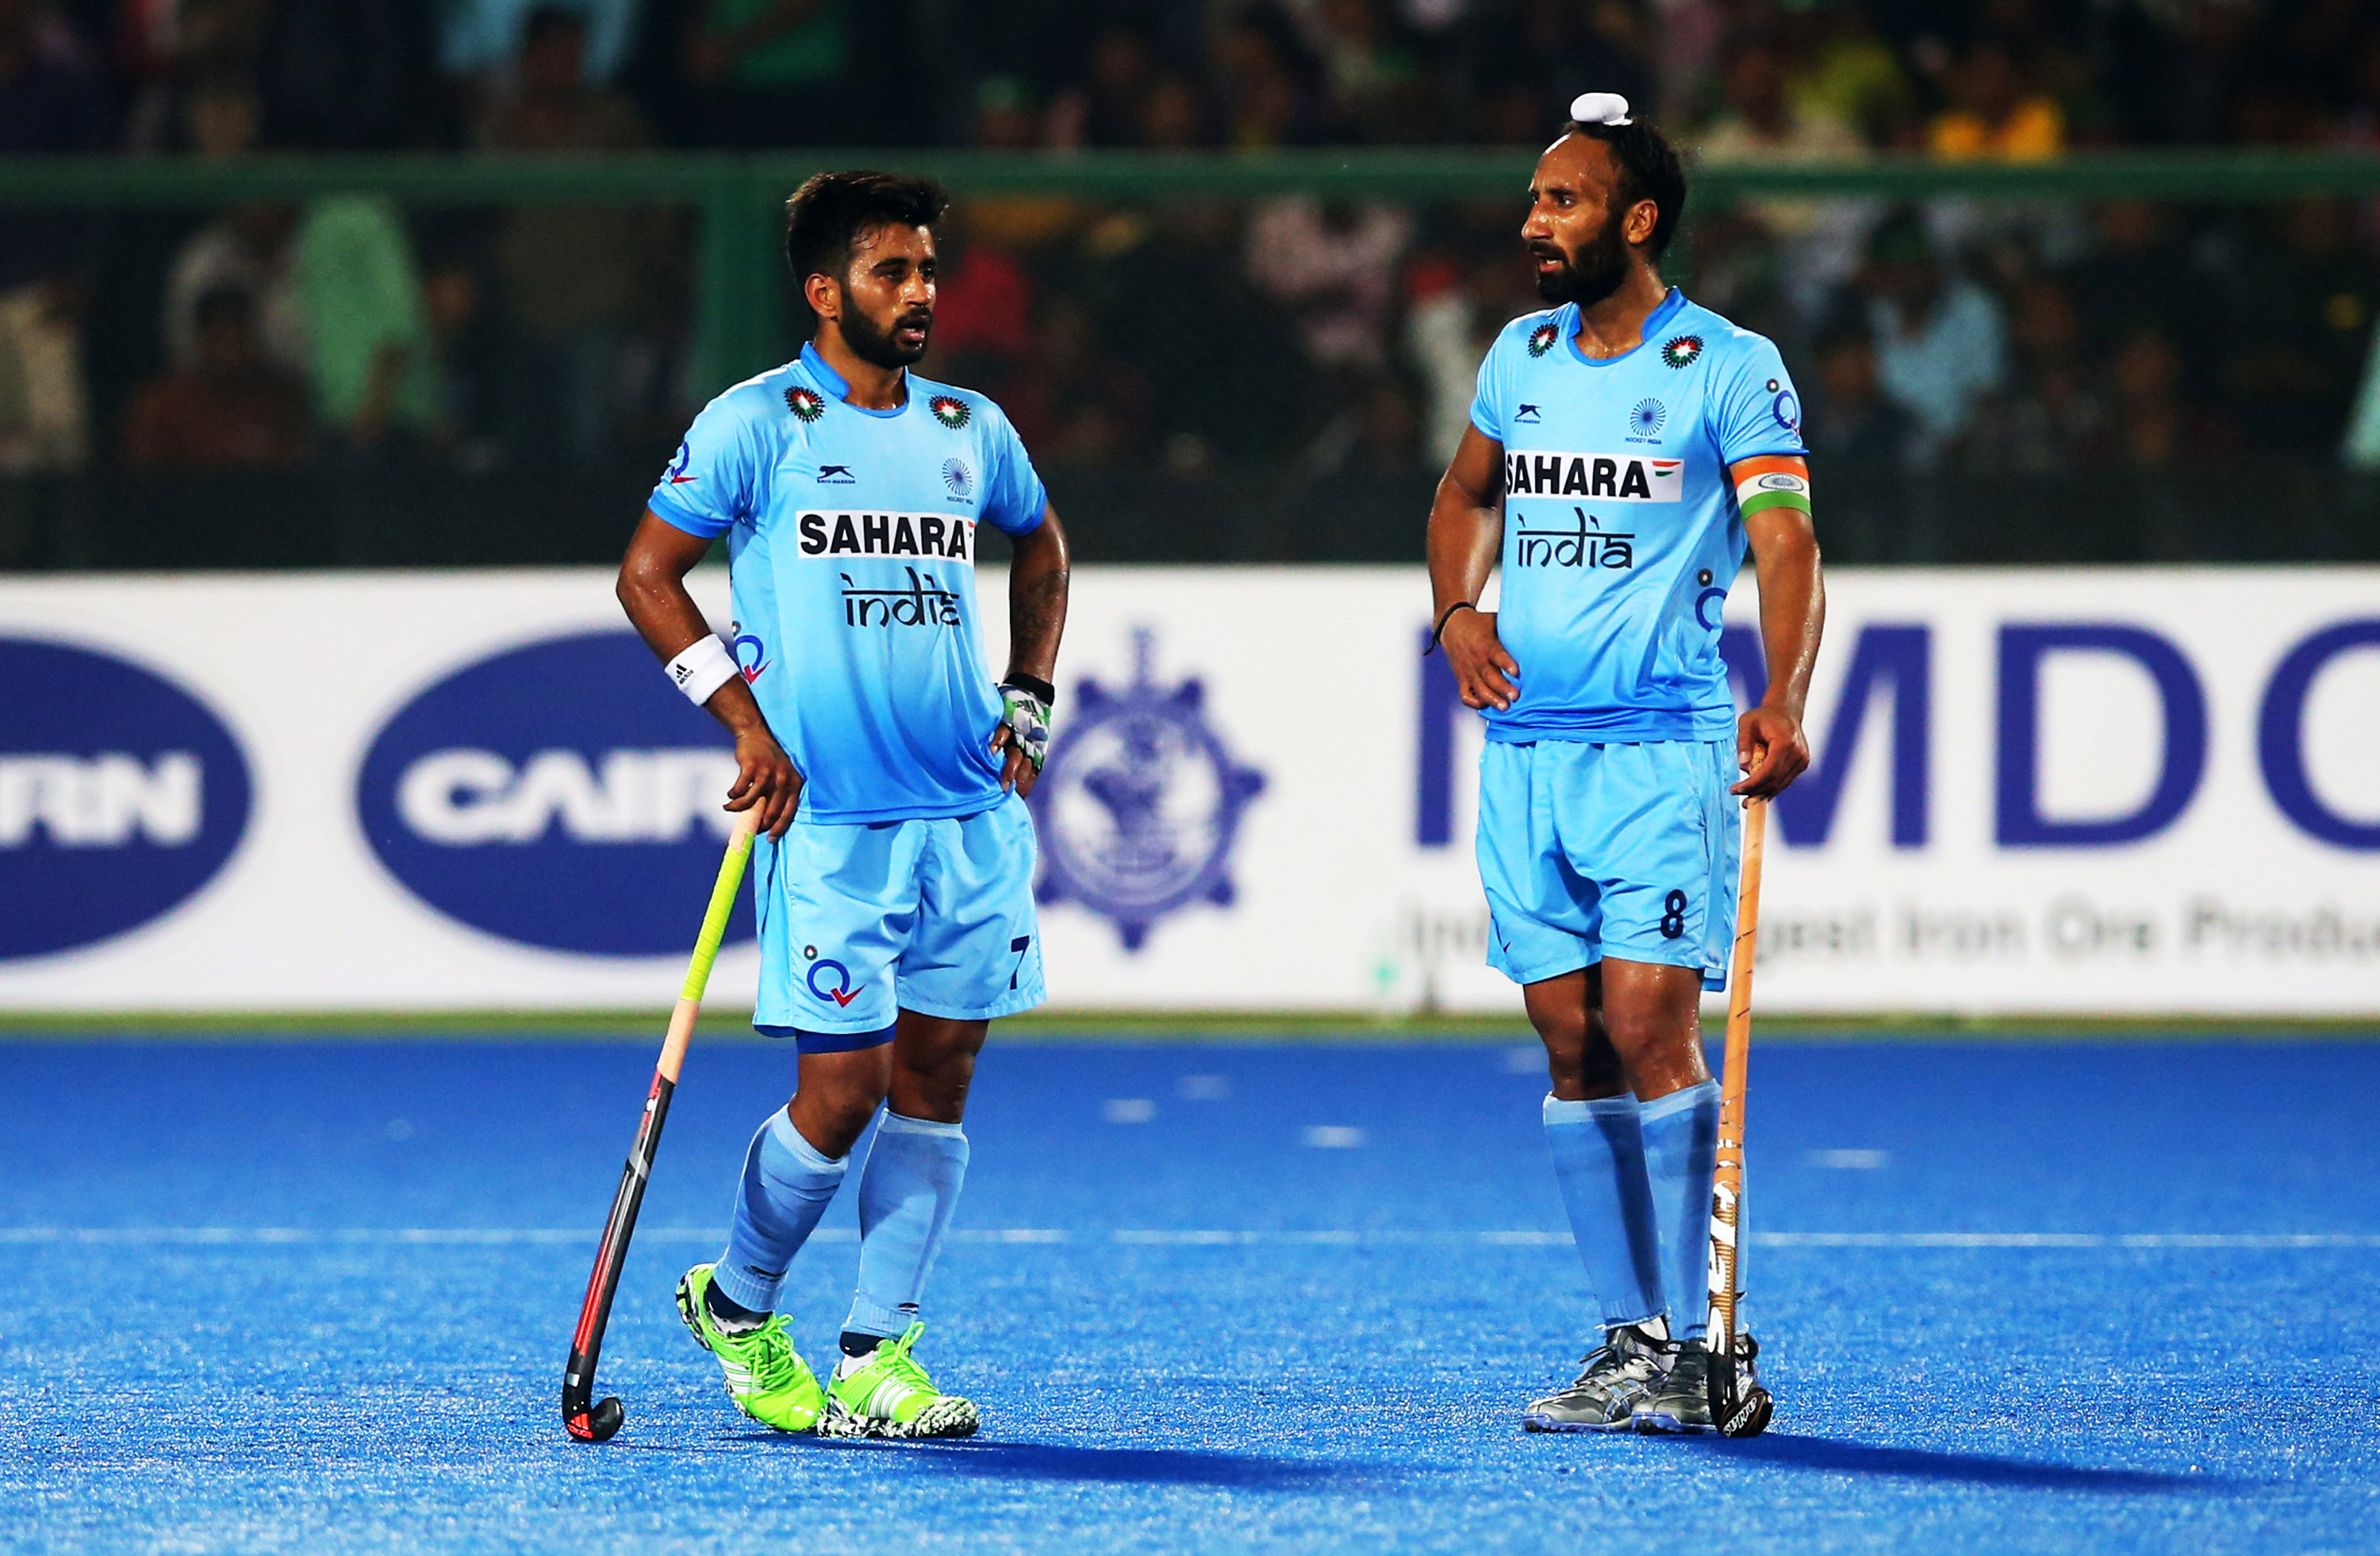 Rio 2016 | India lose 1-2 to Netherlands after missing five penalty corners in a row